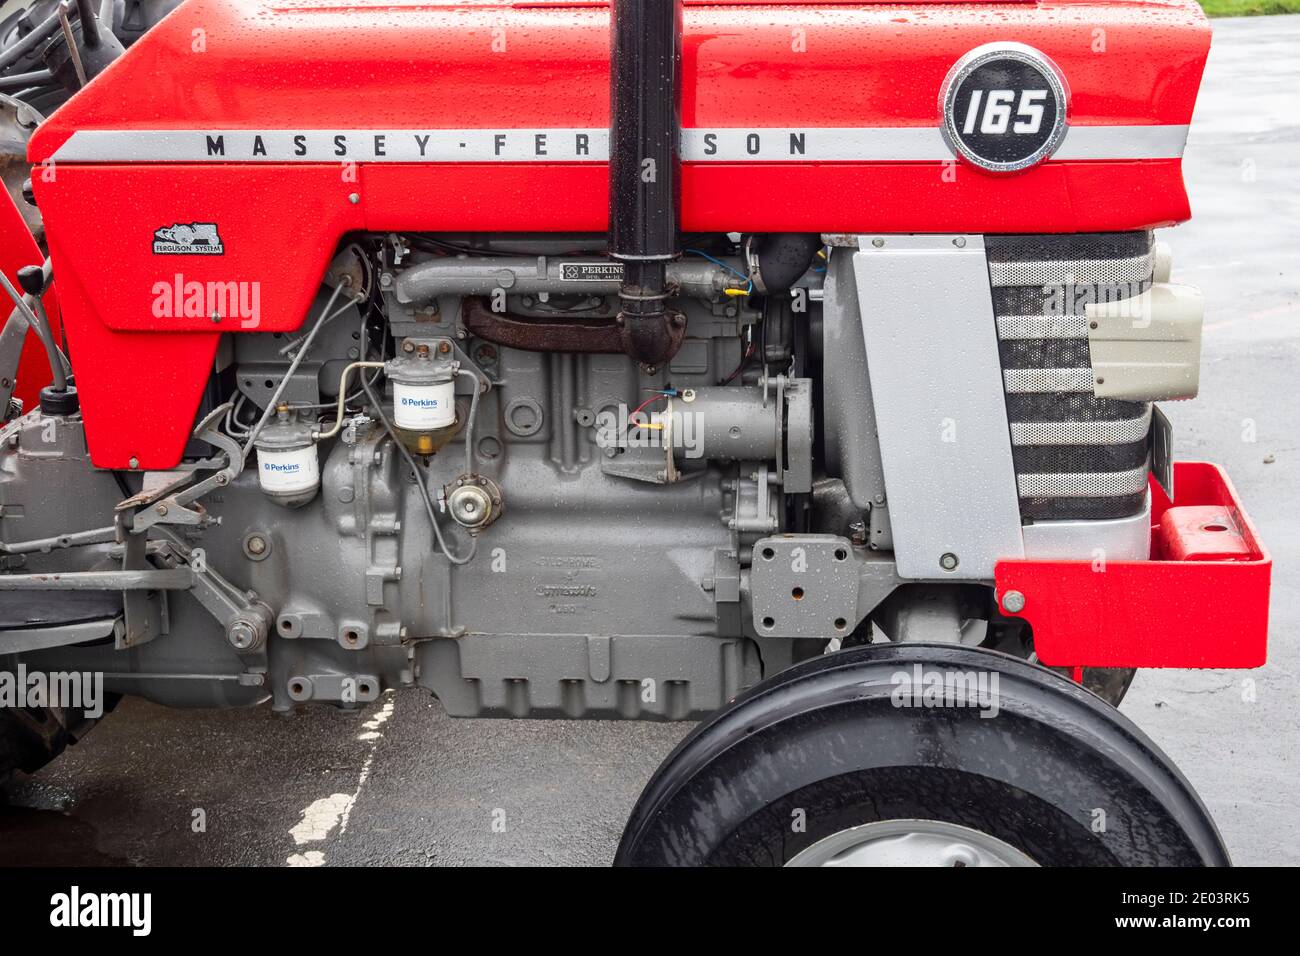 Vintage Massey Ferguson 165 Tractor Hi Res Stock Photography And Images Alamy